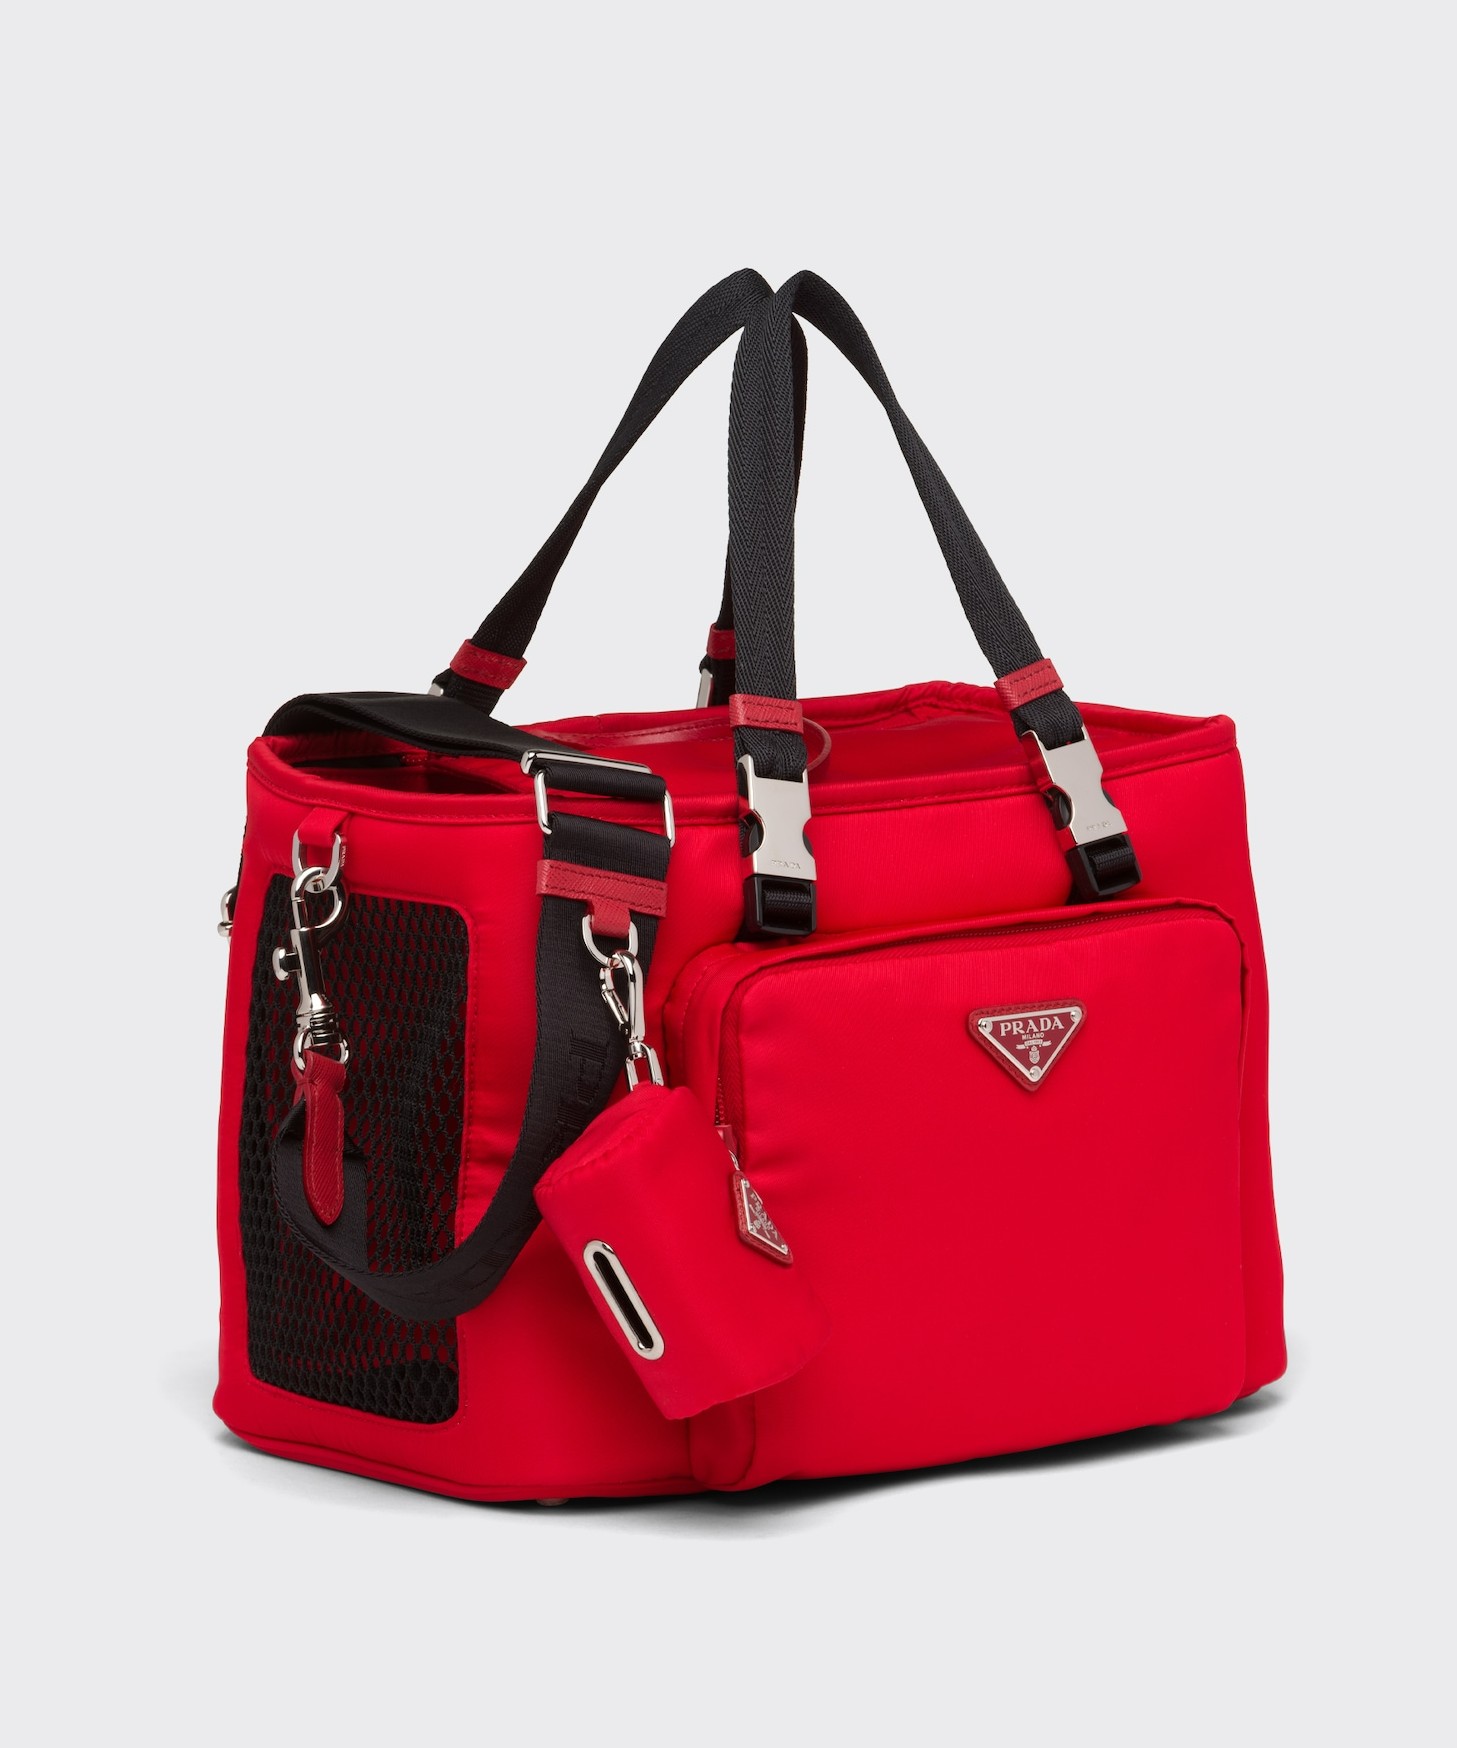 Red Nylon Prada bag decorated with the iconic triangle logo. It features woven nylon handles, a detachable adjustable woven nylon and leather shoulders strap with removable pet waste bag pouch.